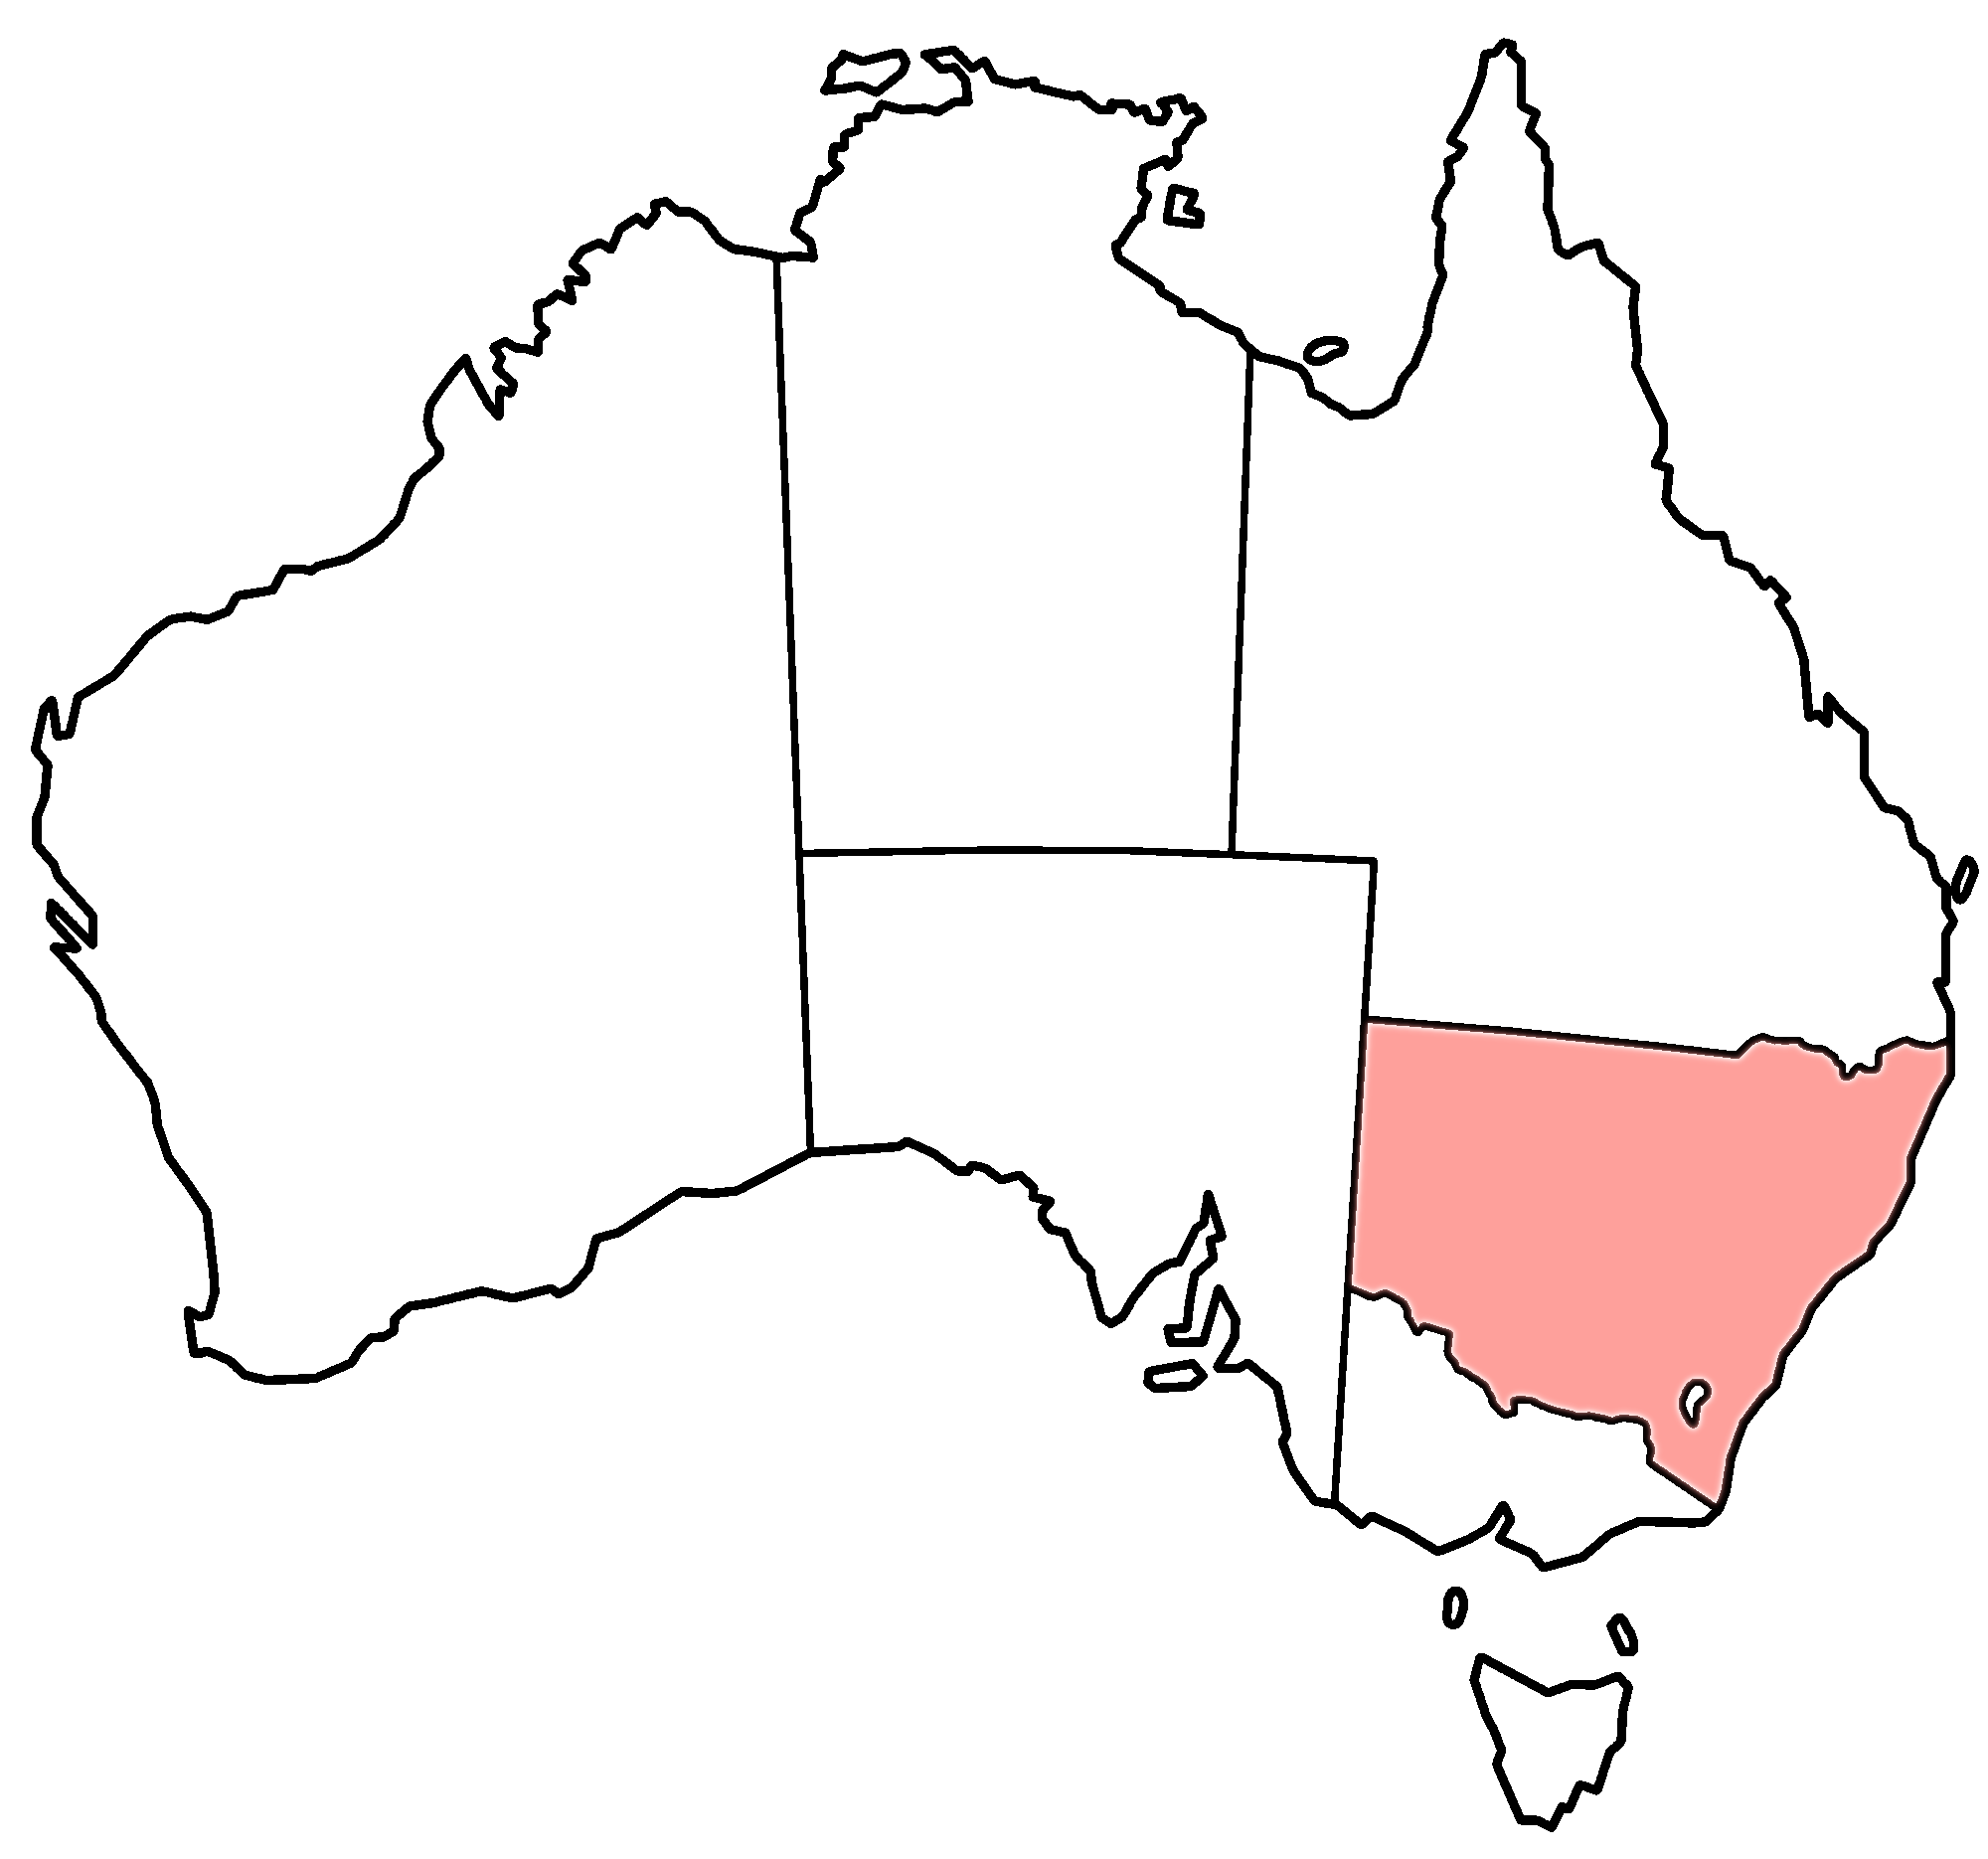 nsw on map